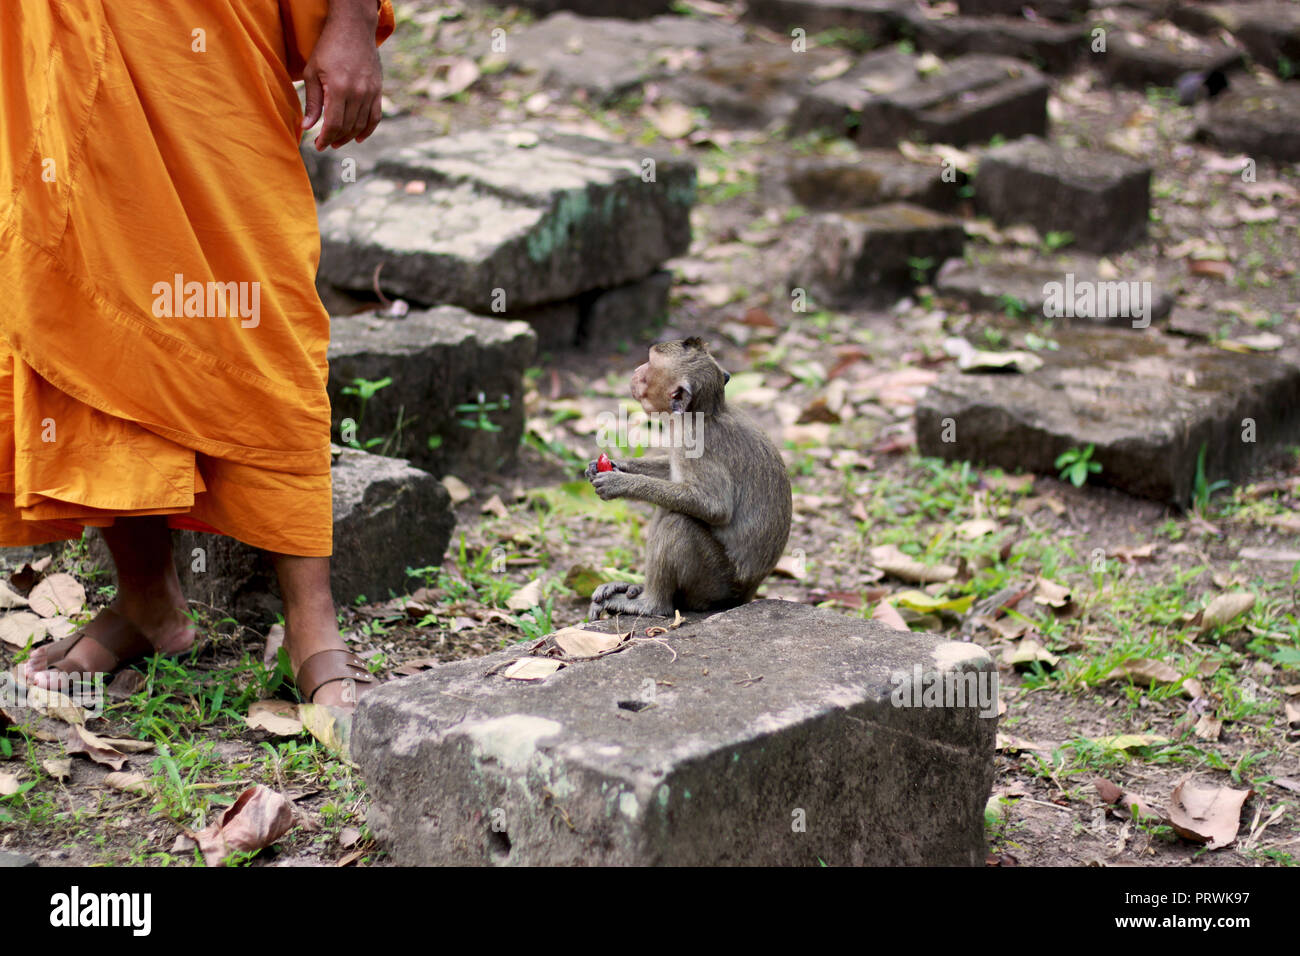 Monkey eating fruit and watching a Buddhist monk wearing orange robes in Angkor Wat, Siem Reap, Cambodia, Asia. Stock Photo